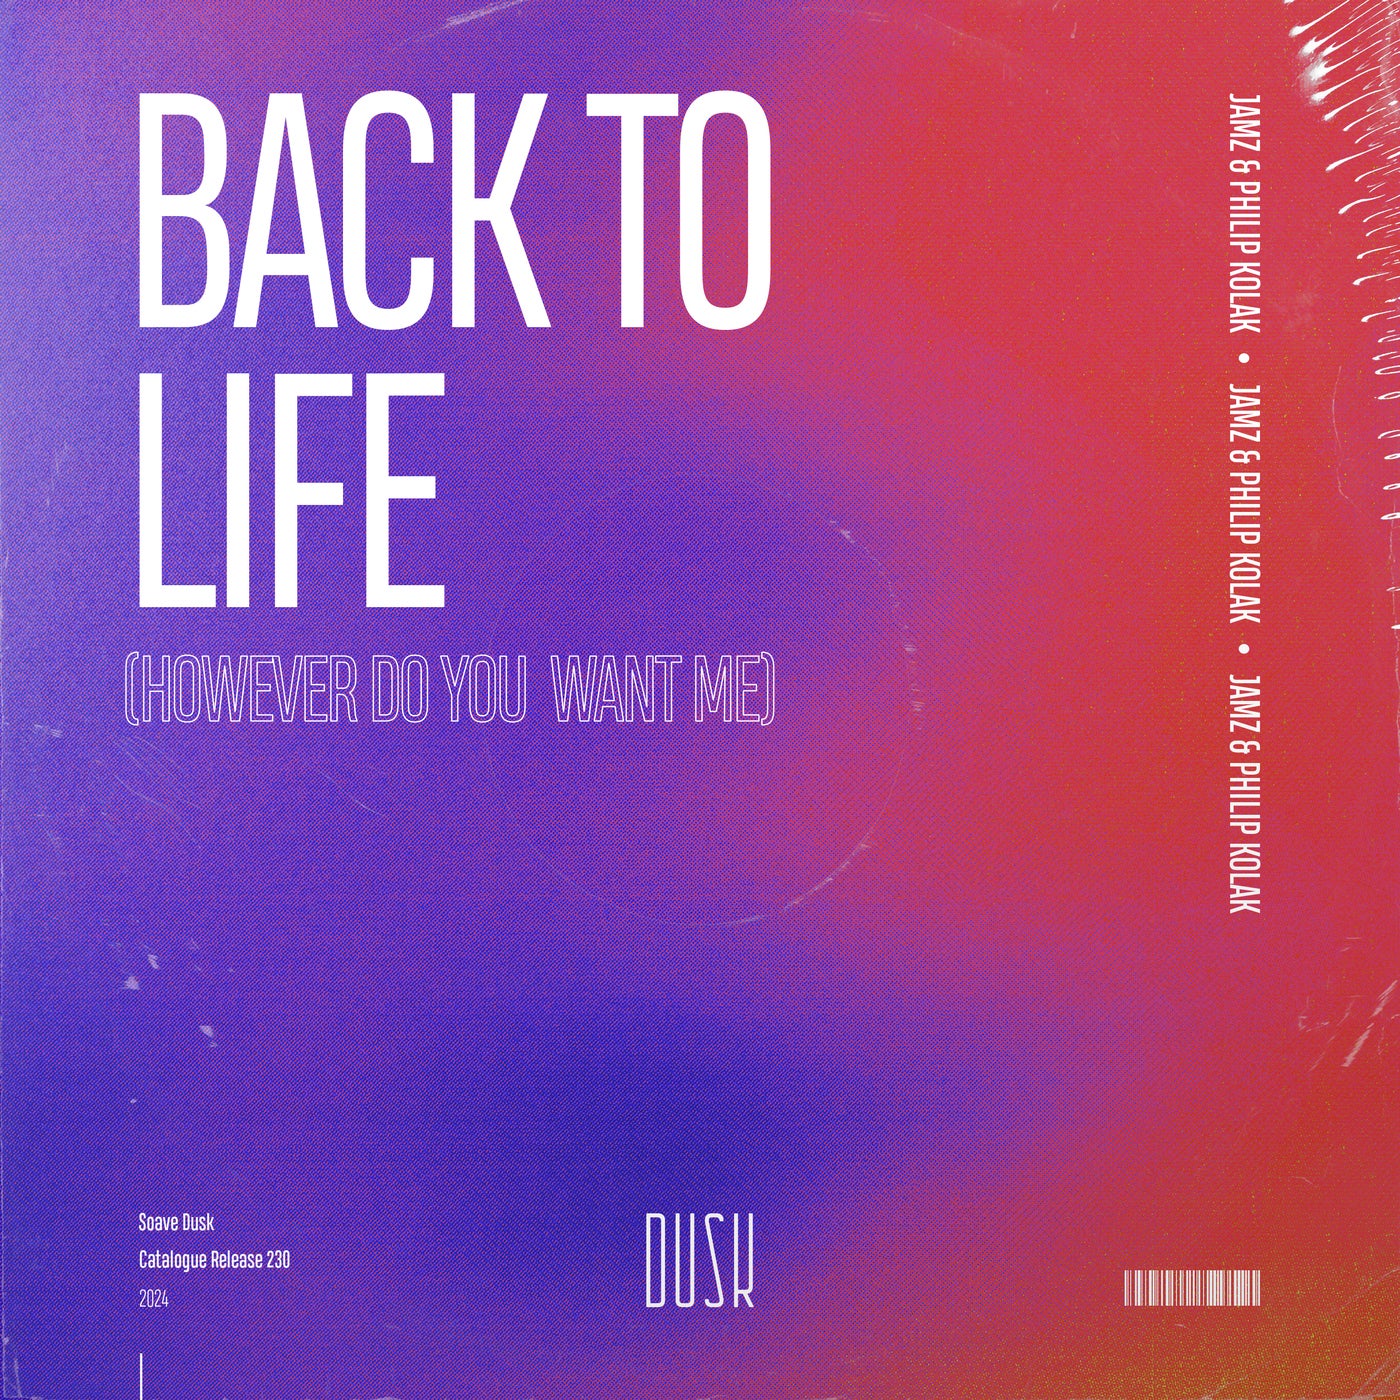 Back To Life (However Do You Want Me)